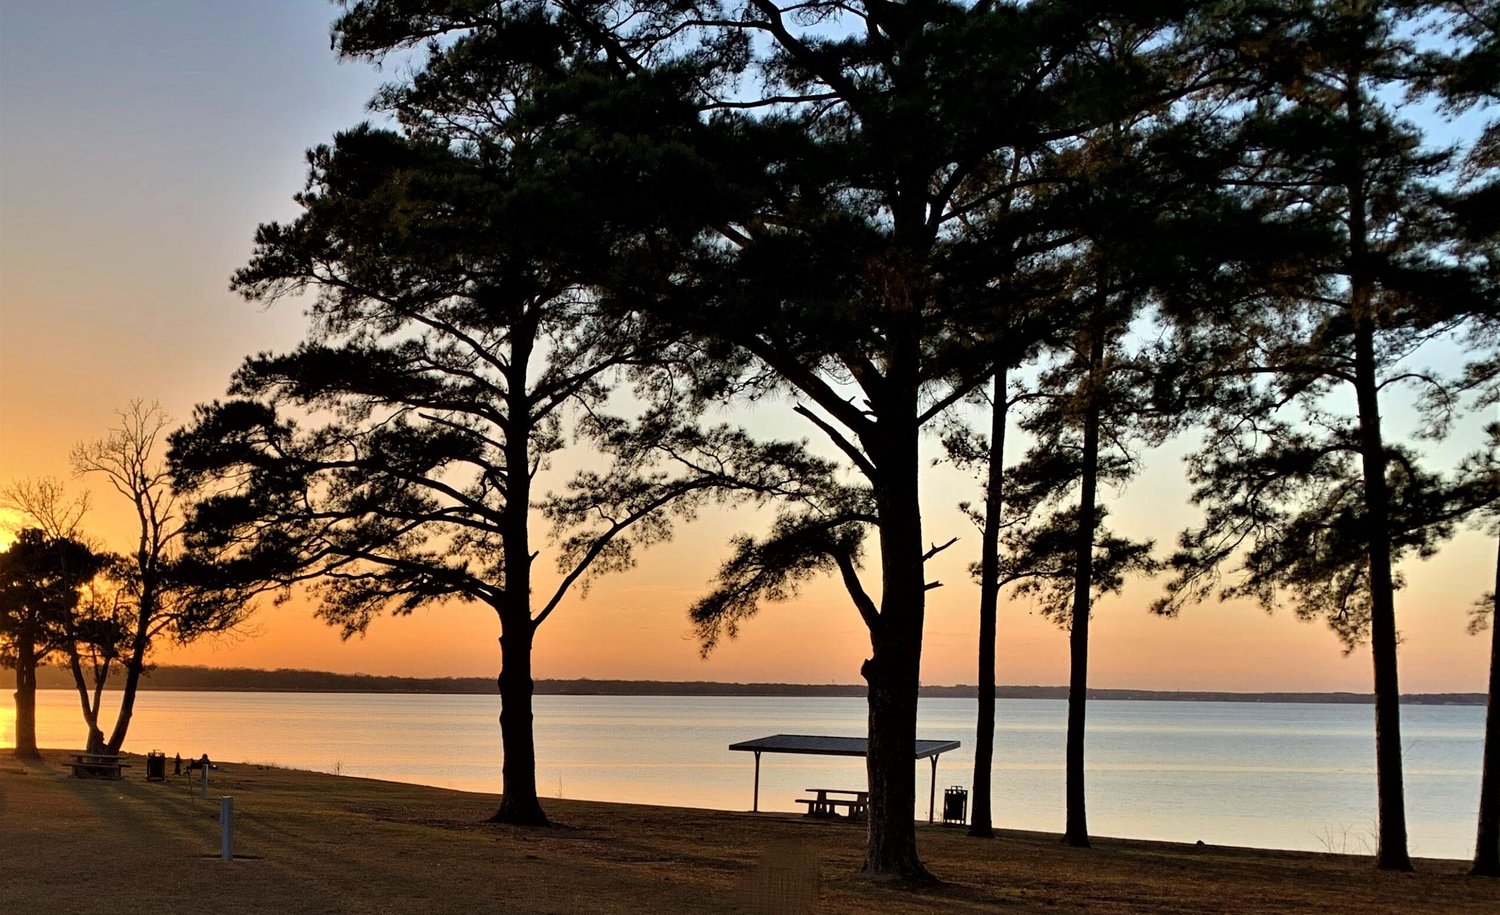 Amazing sunrises and sunsets are just a couple of the reasons to visit the Rez’s Lakeshore Park.